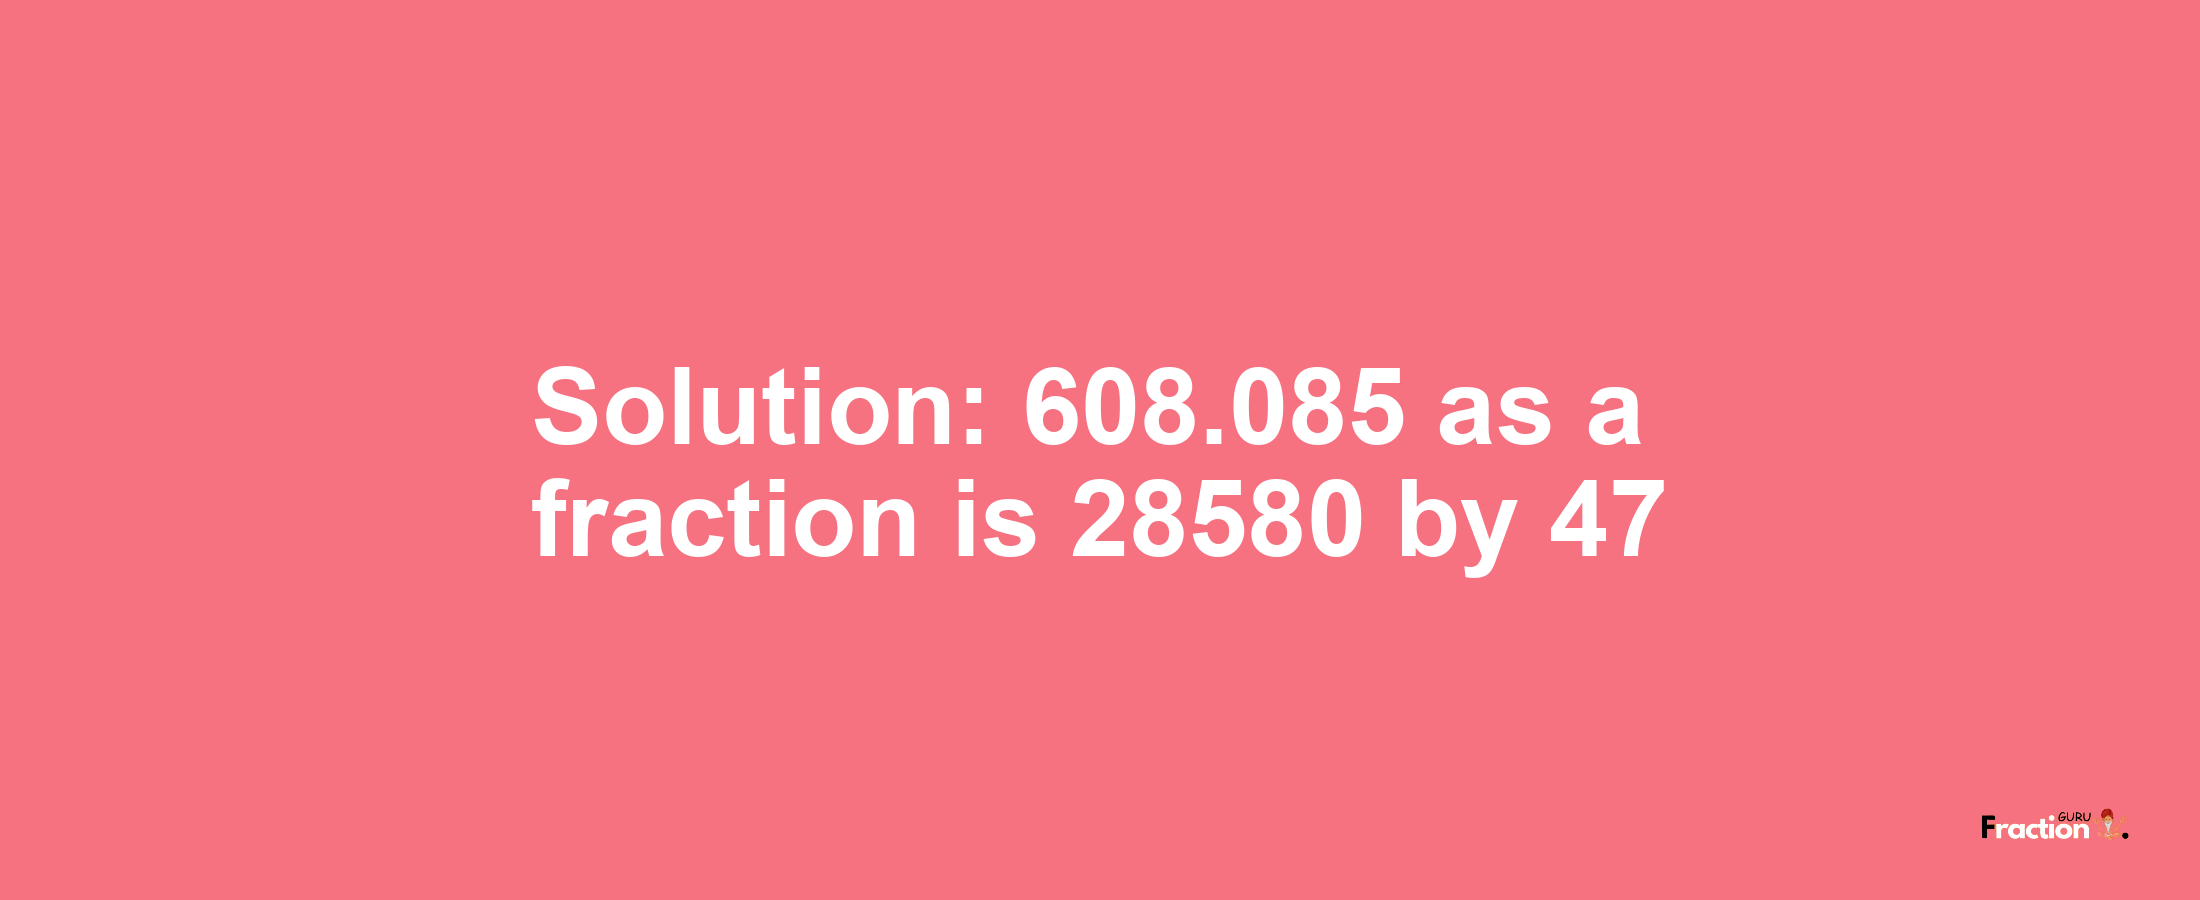 Solution:608.085 as a fraction is 28580/47